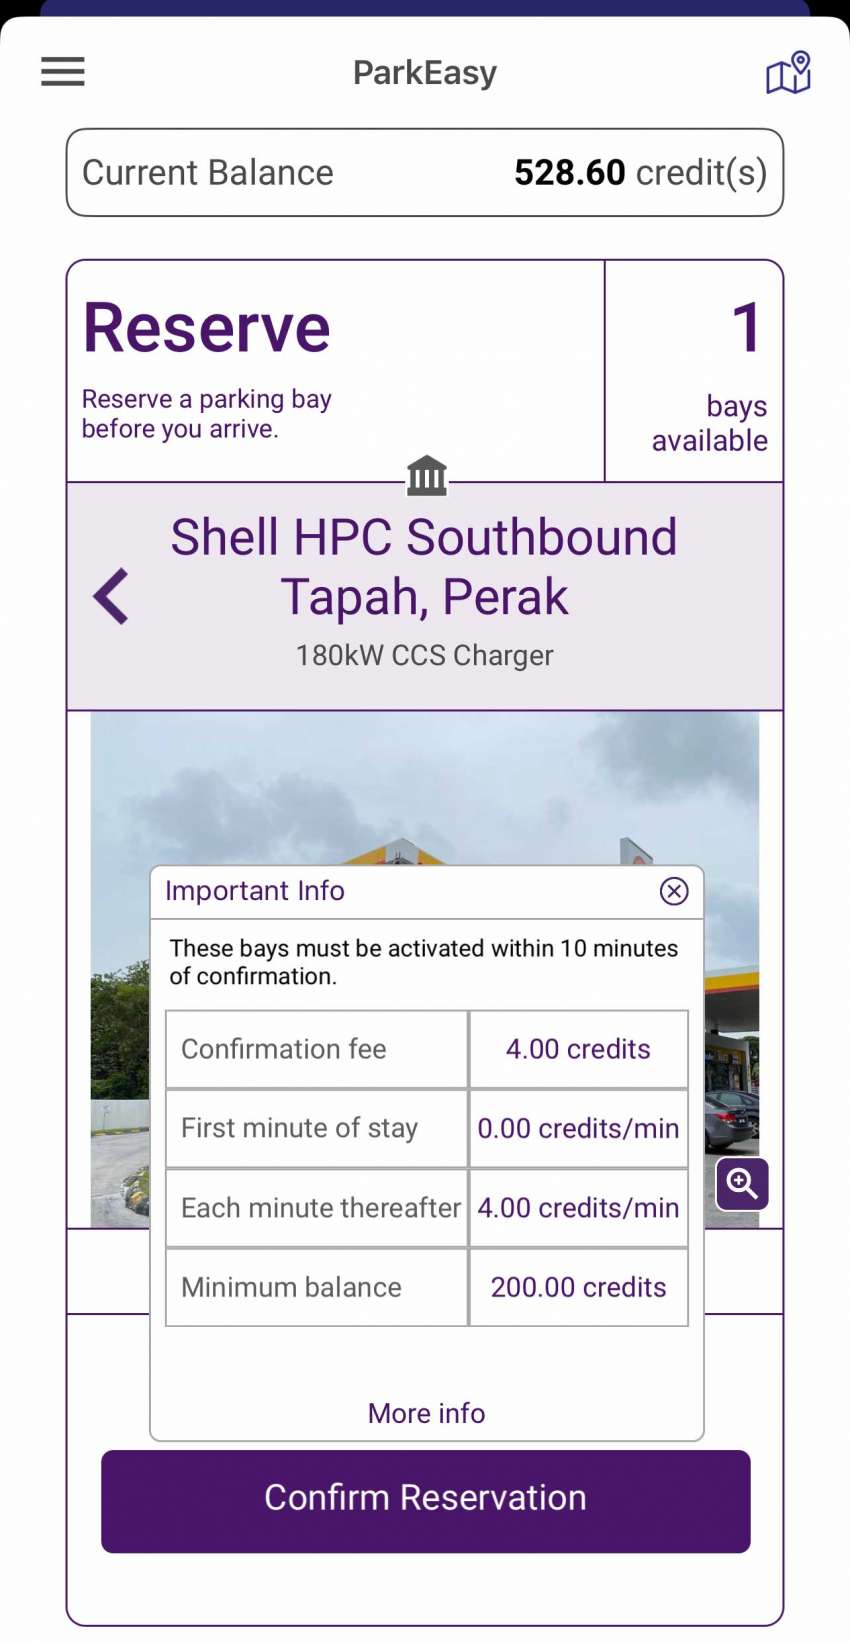 Shell Recharge Tapah south-bound DC charger – 180 kW CCS2, book via ParkEasy, RM4 per minute 1556047